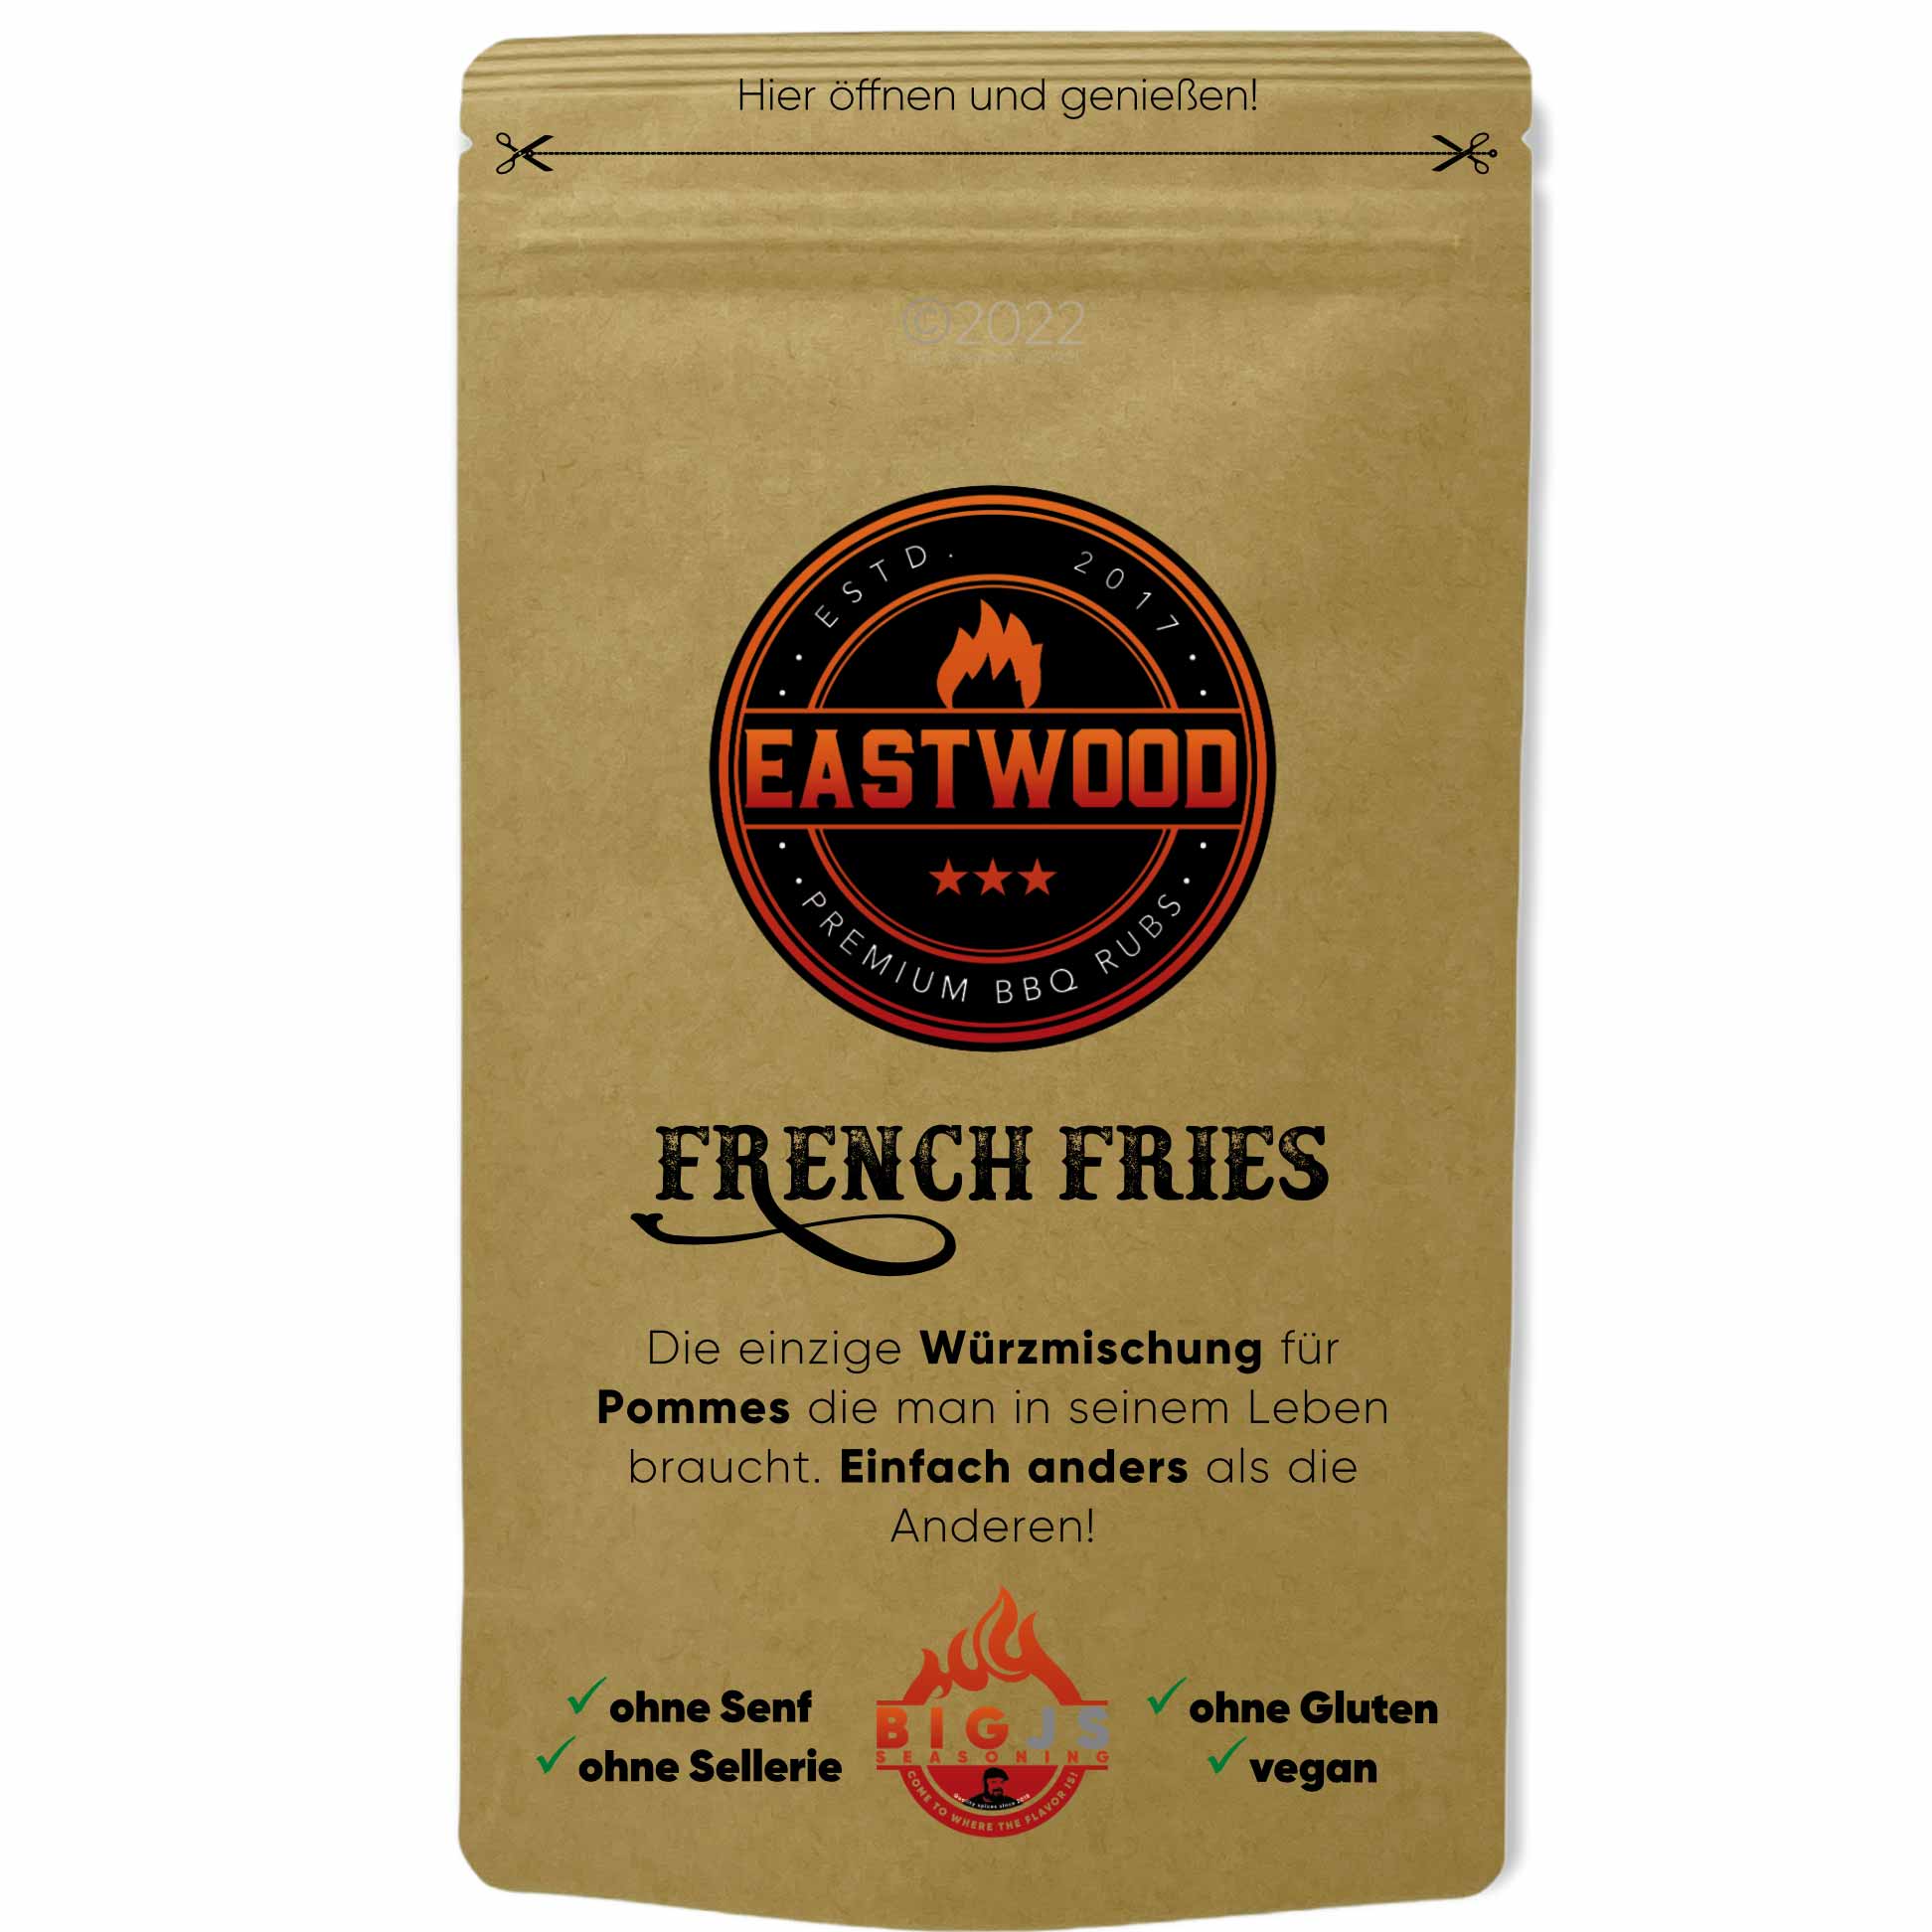 Eastwood French Fries 250g Beutel